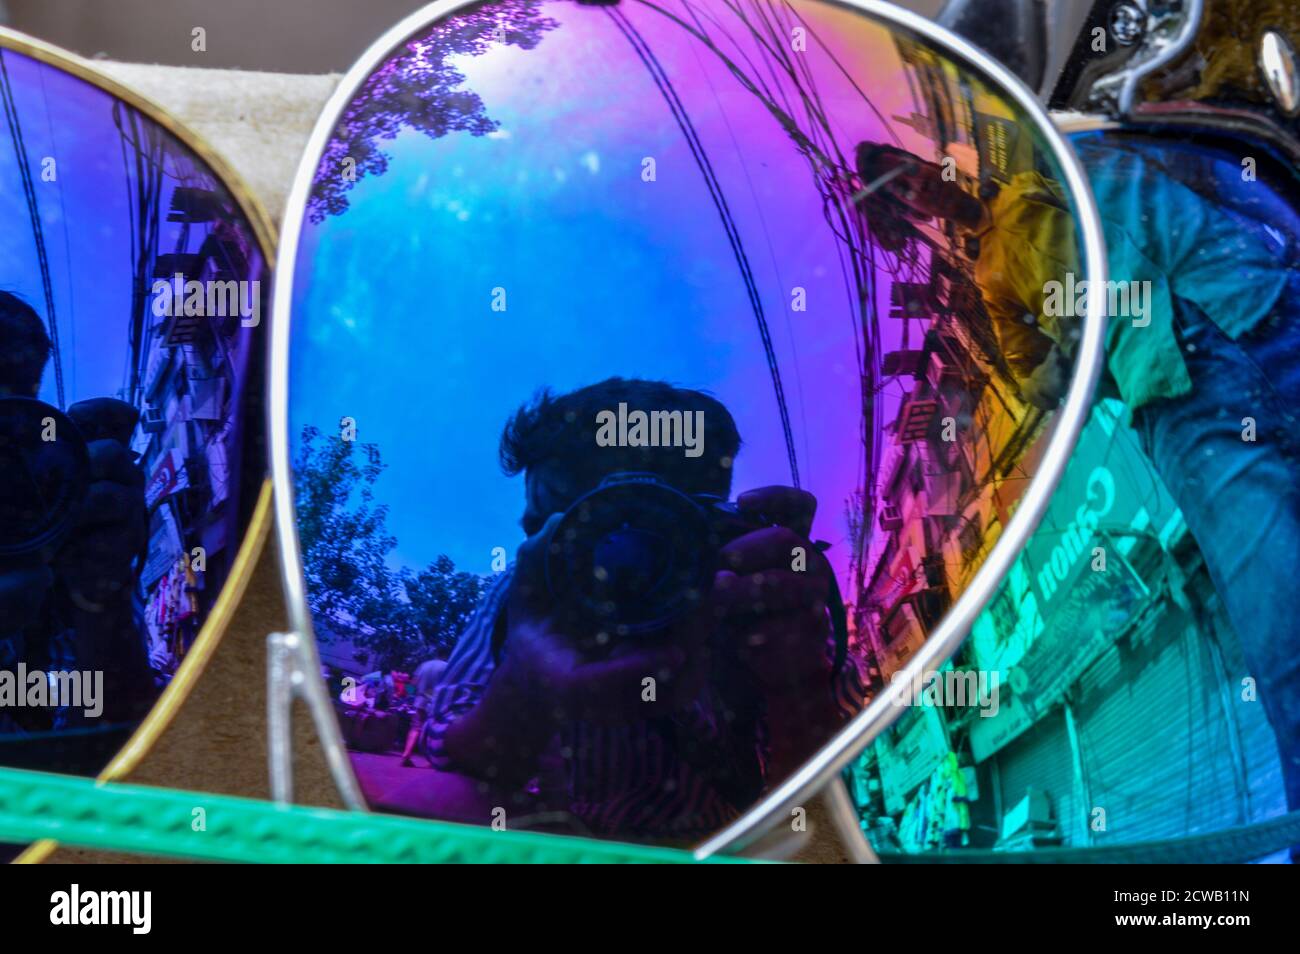 A Reflection of photographer on goggle. Stock Photo